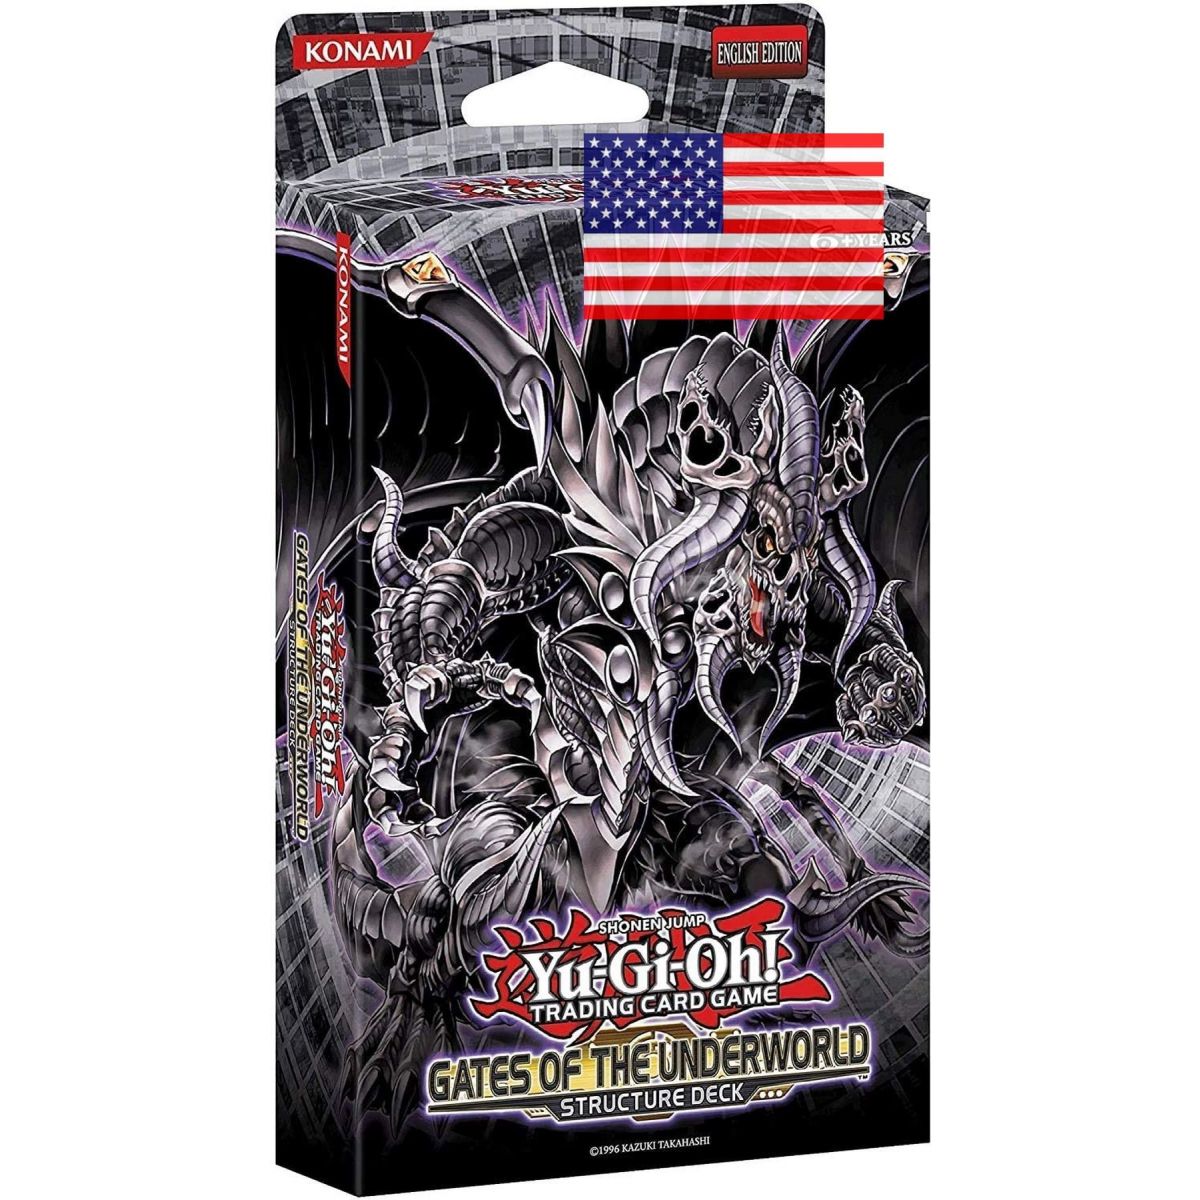 *US Print SEALED * Yu-Gi-Oh! - Structure Deck - Gates of The Underworld - Unlimited